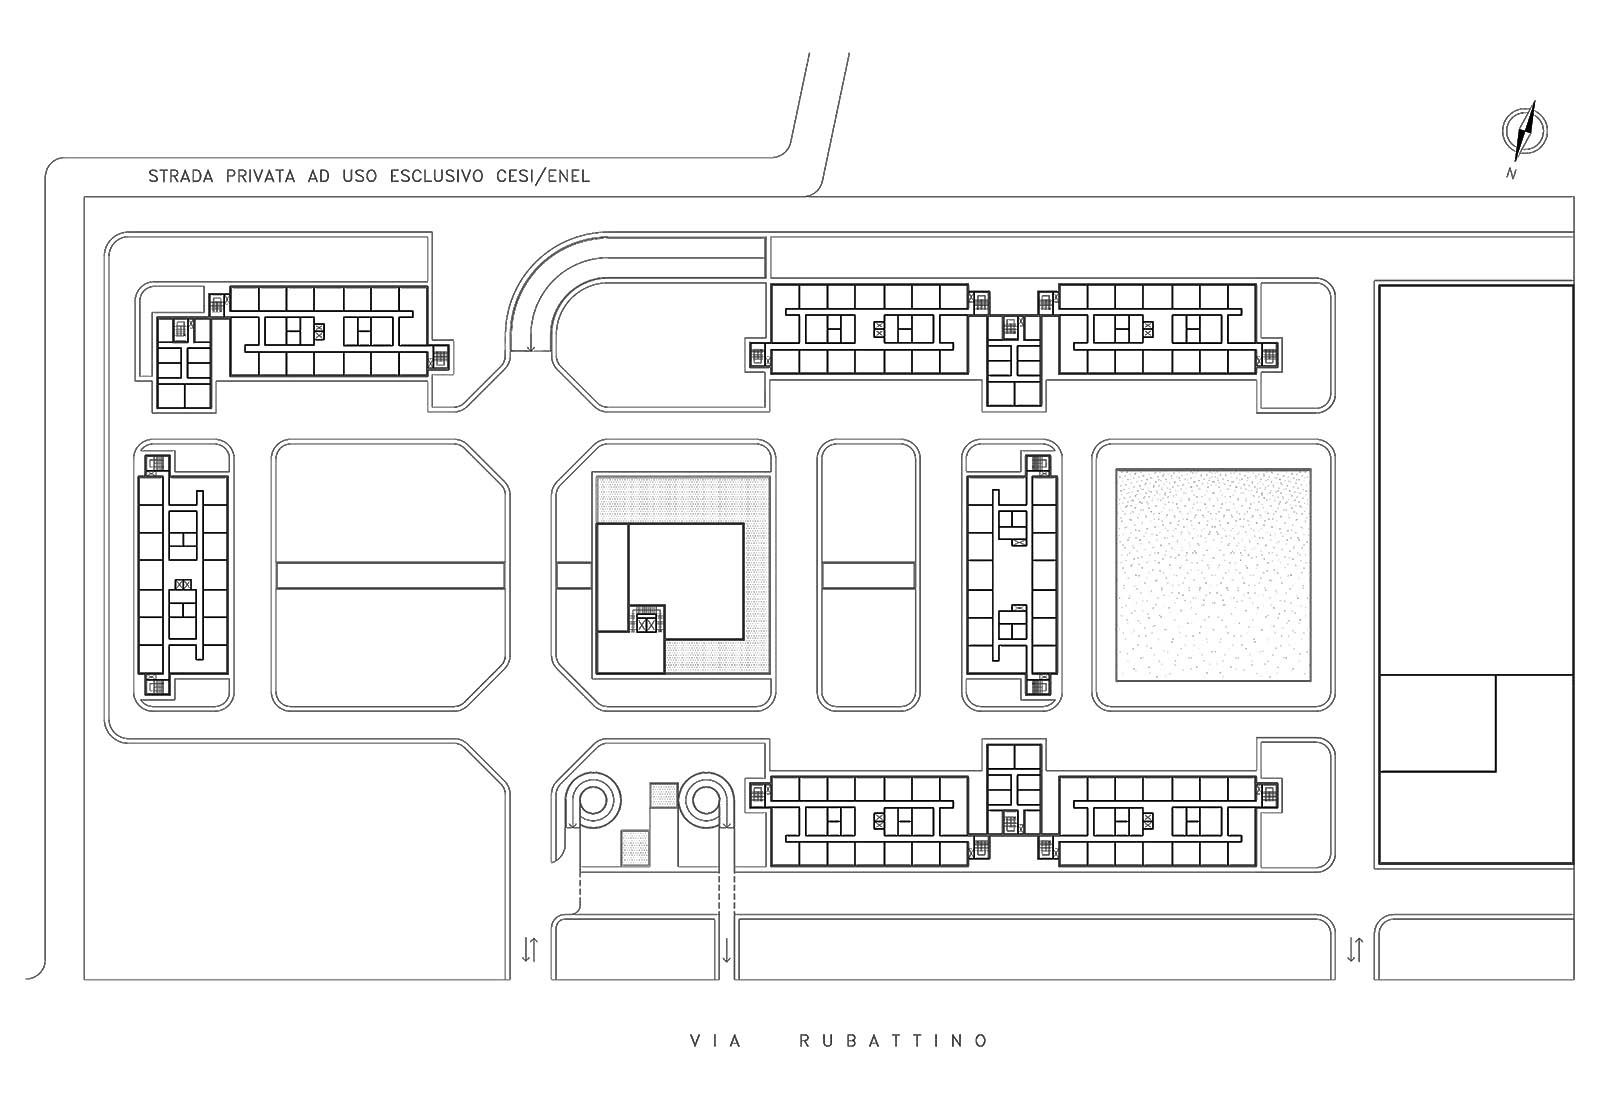 ENEL research center in Milan - Typical floor plan